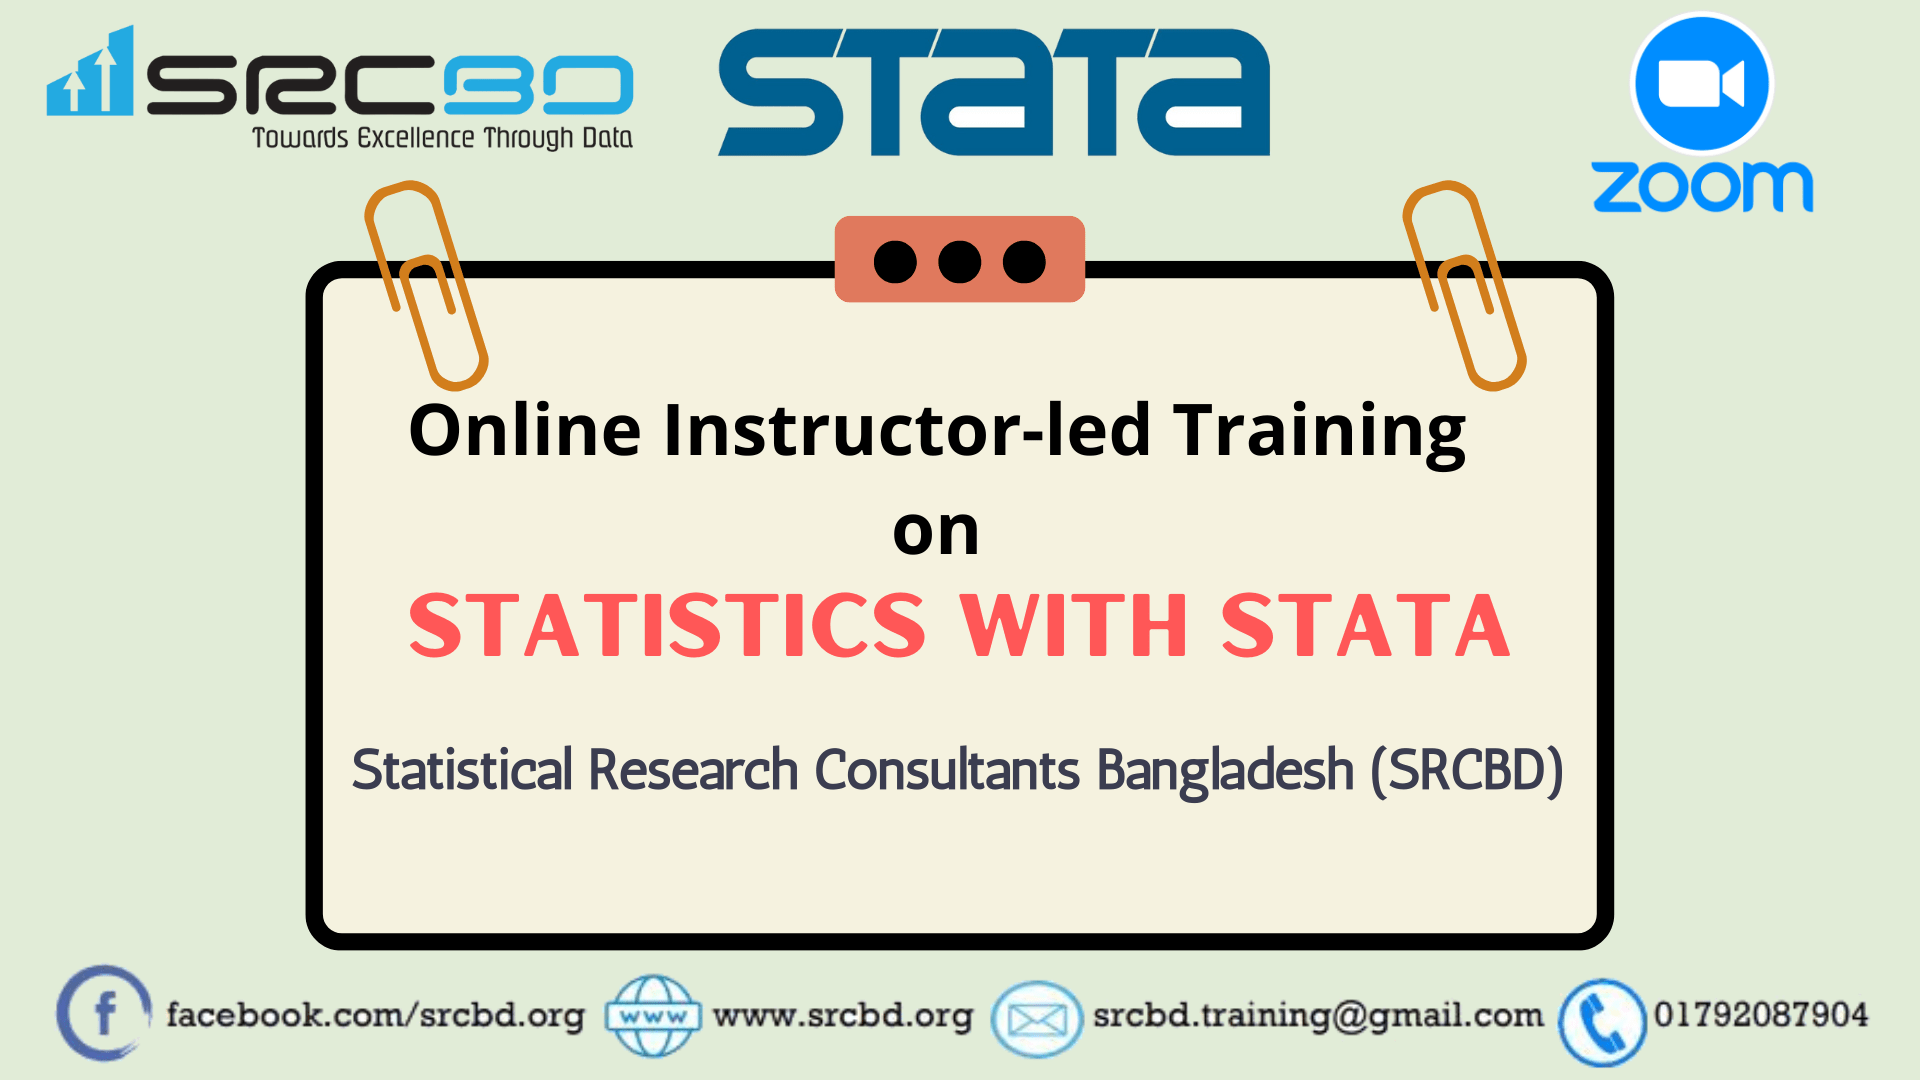 statistical research consultants bangladesh (srcbd)